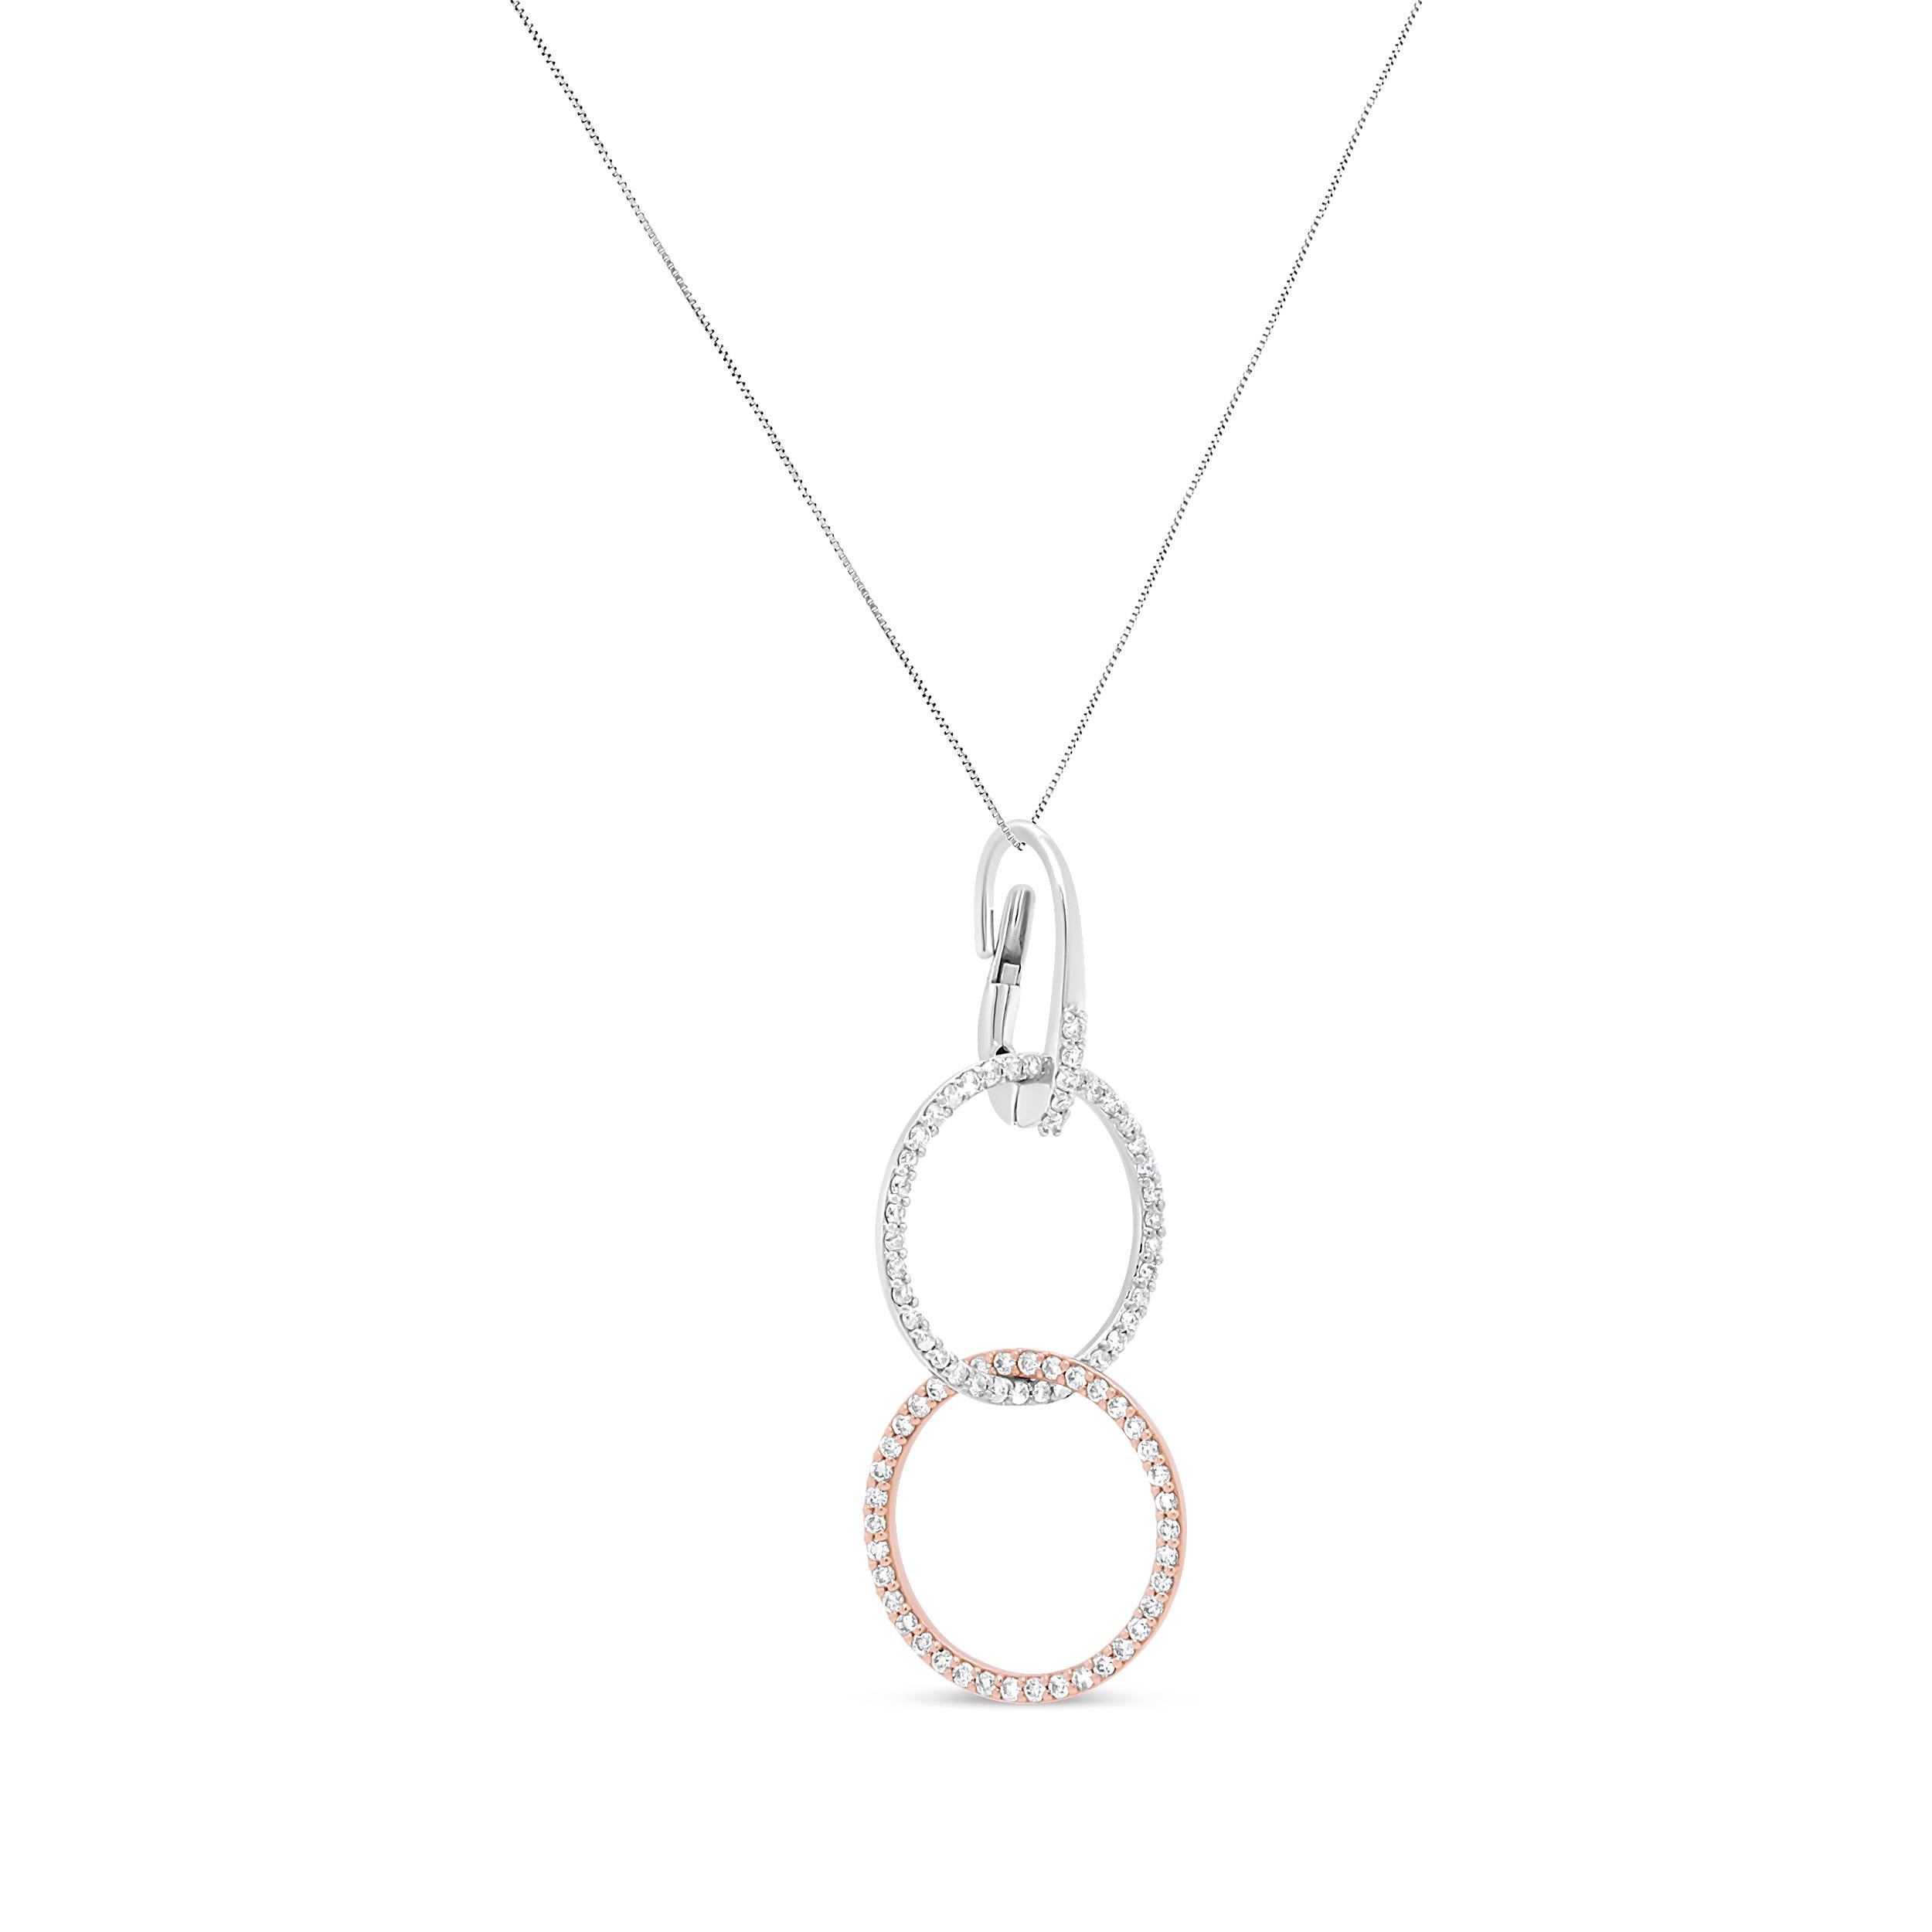 This striking pendant necklace shows off a visually enchanting design concept comprised of interlocked circles in a vertical pattern encrusted with shimmering white diamonds. The two tone metal shows off a blend of 18k white and rose gold in a